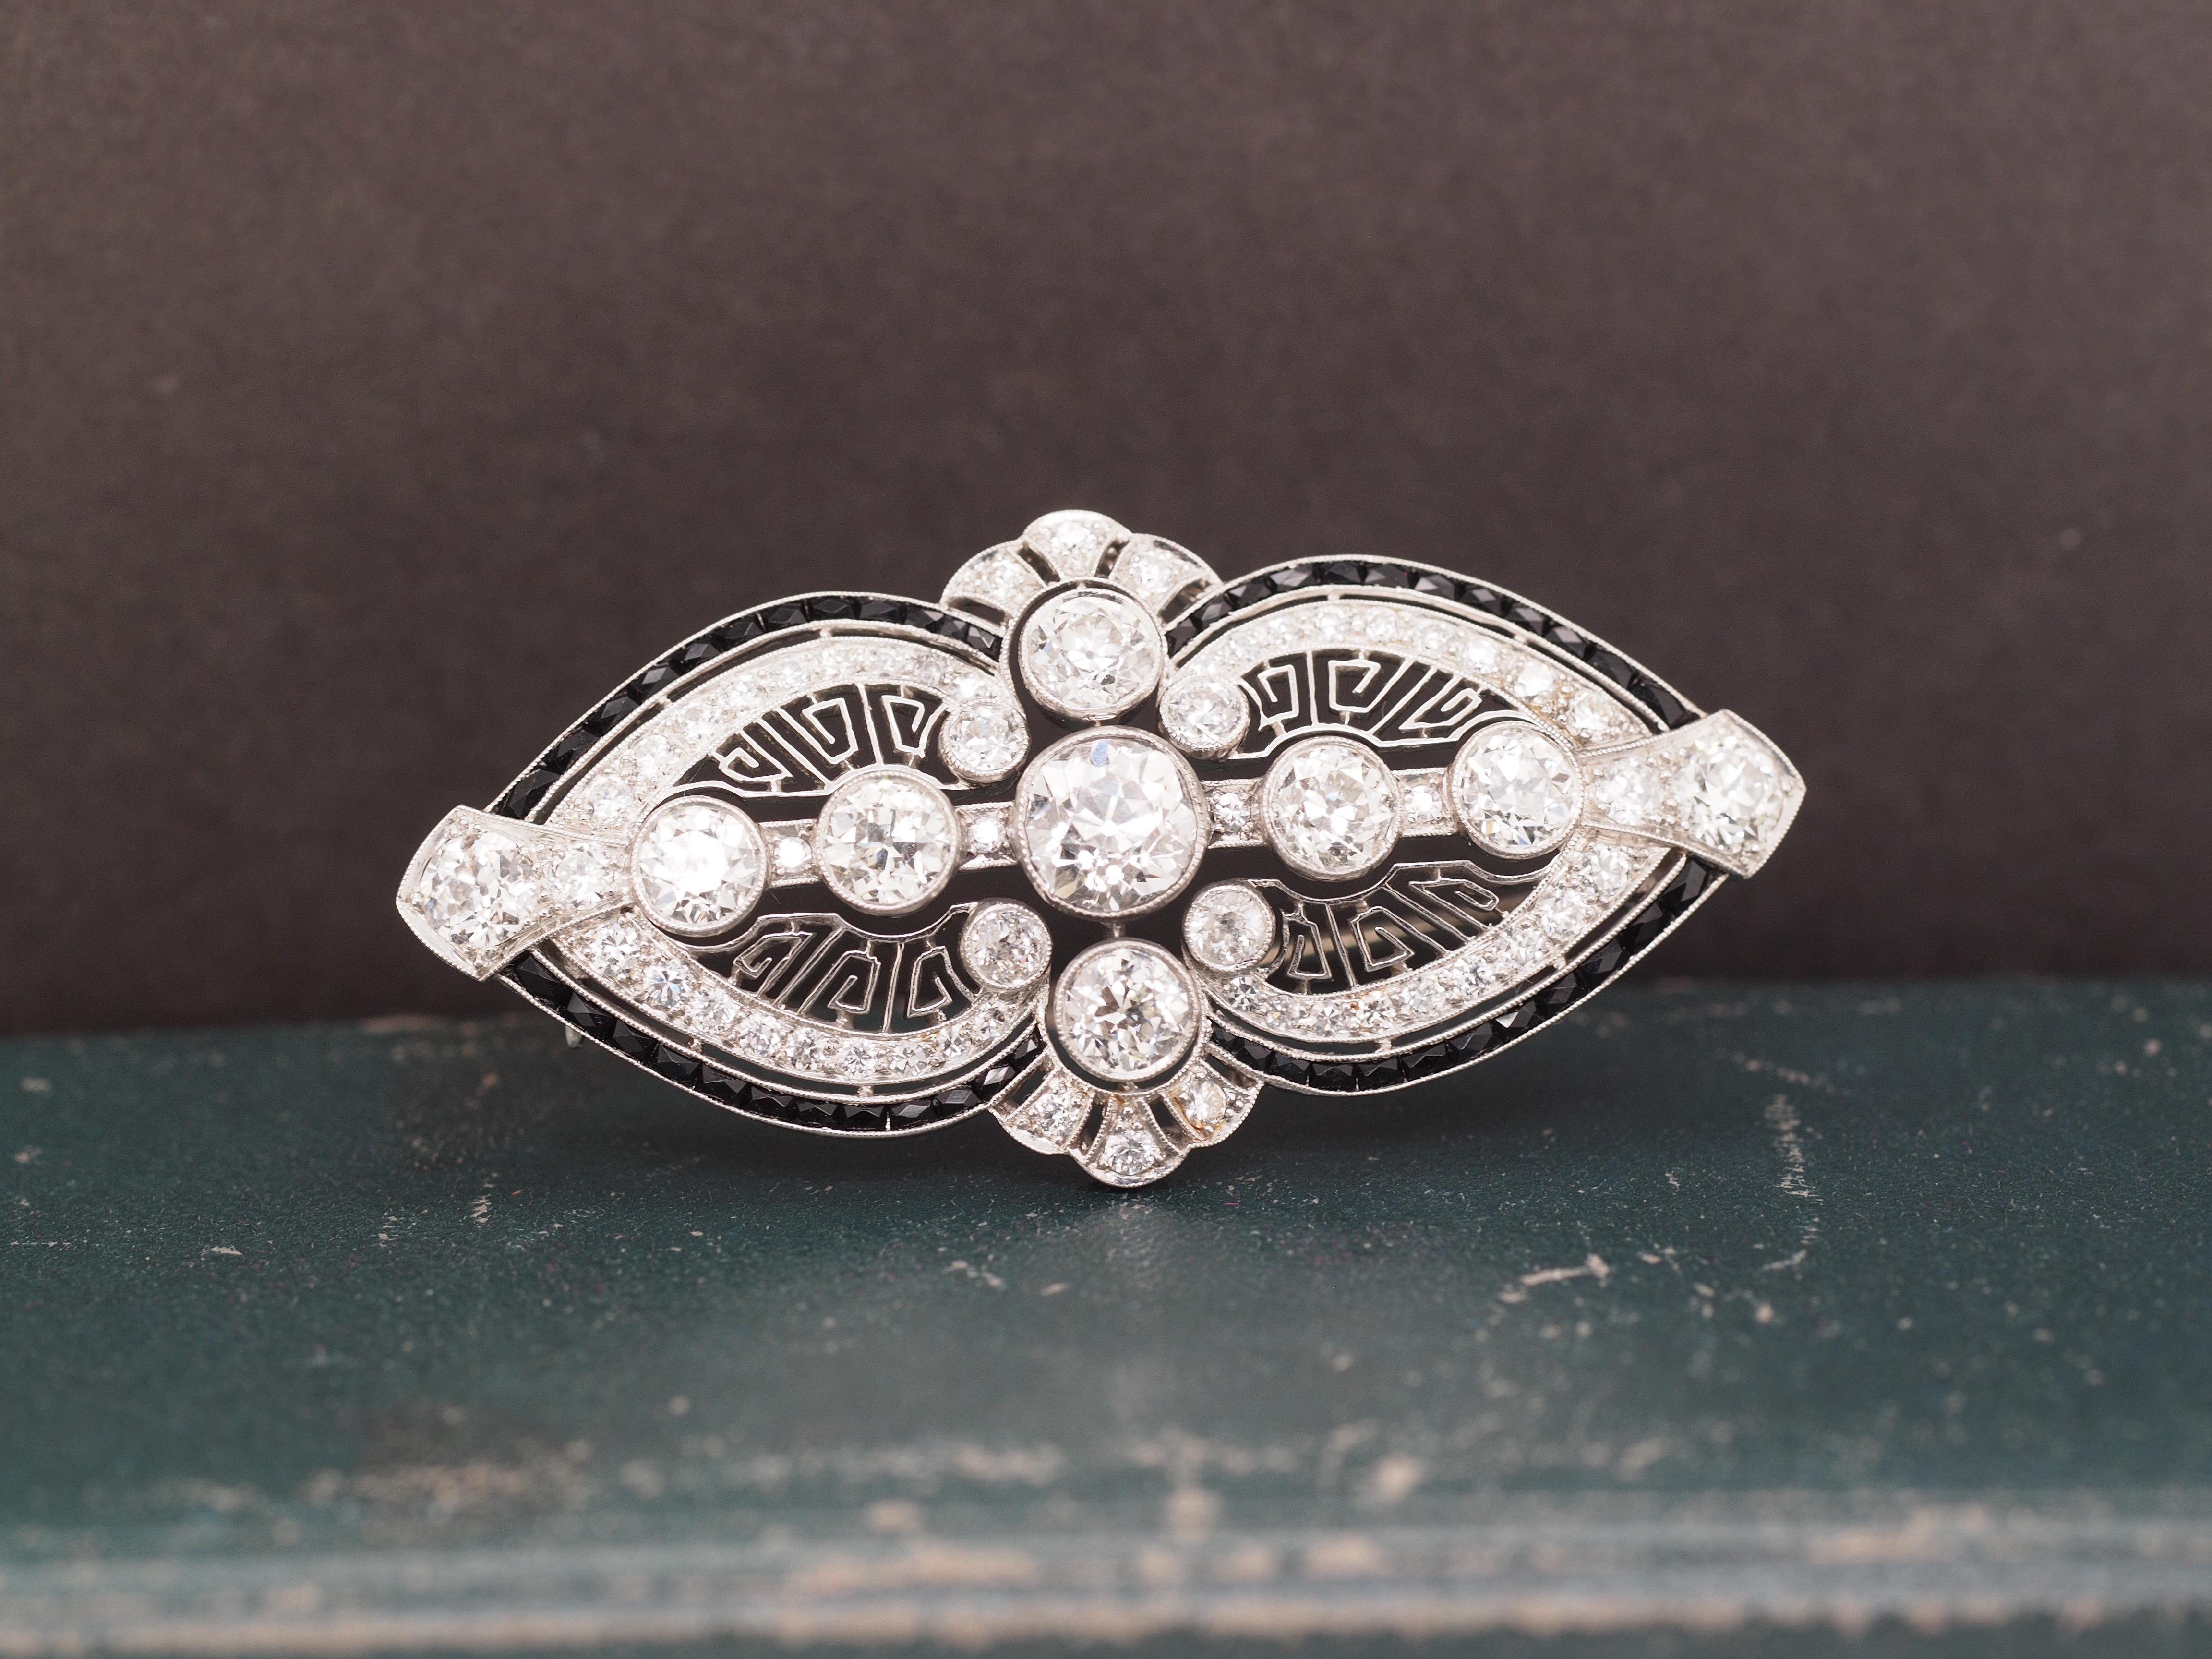 Year: 1920s
Item Details:
Metal Type: Platinum [Hallmarked, and Tested]
Weight: 16.5 grams
Center Diamond Details:
GIA Report# : 52229844958
Weight: 1.74
Cut: Old Mine Brilliant
Color: J
Clarity: SI1
Side Diamond Details:
Weight: 5.26ct total